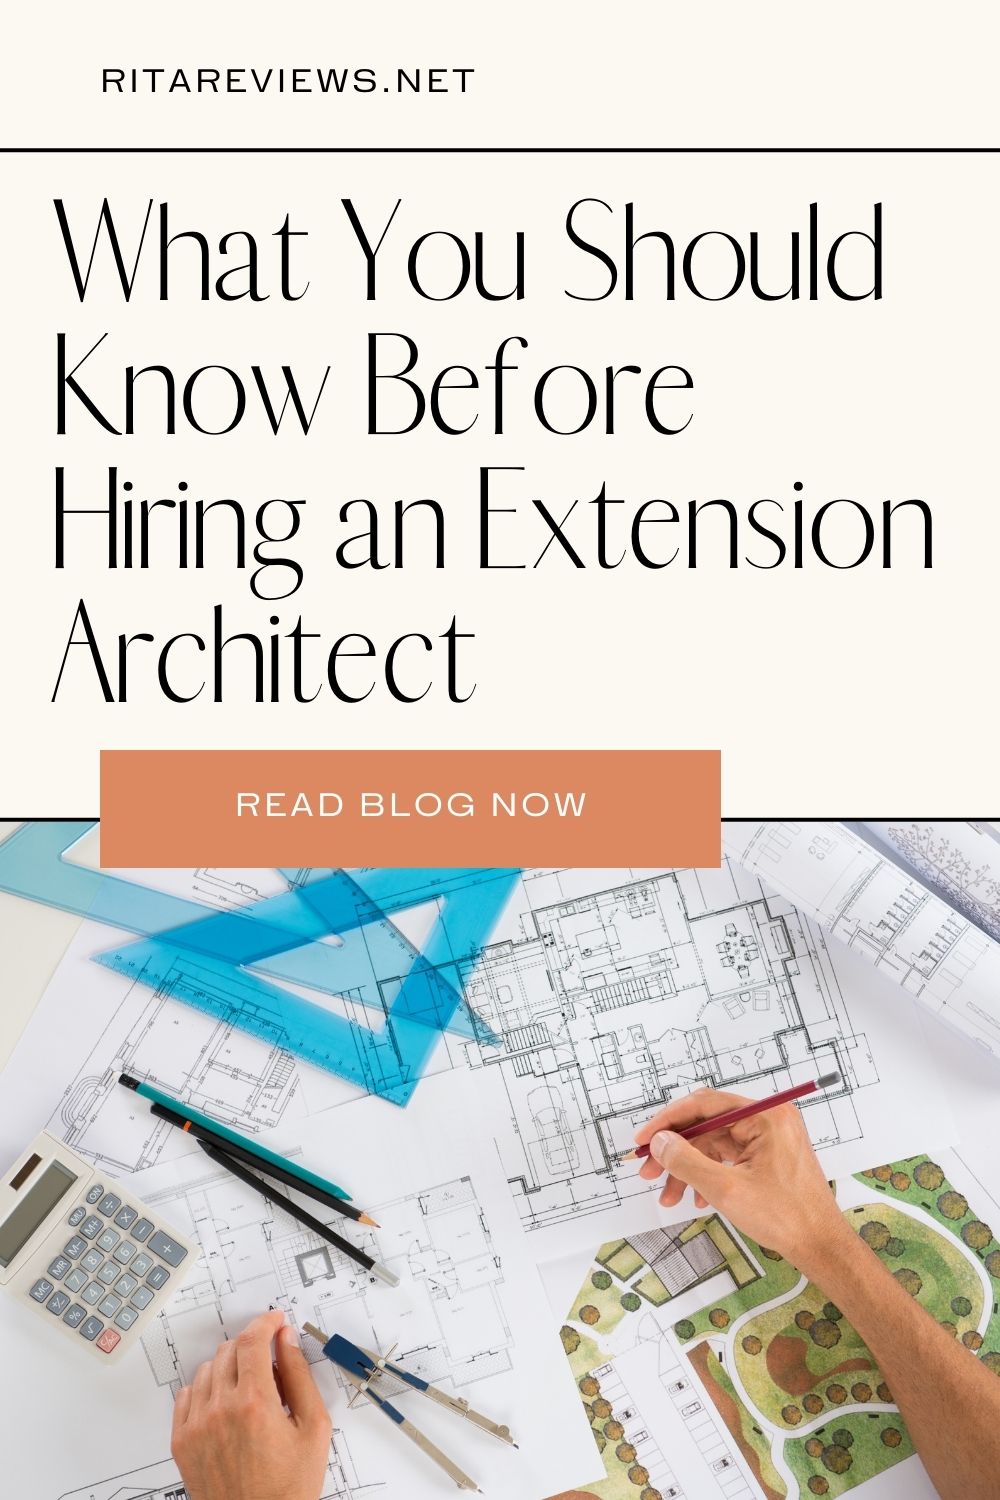 What You Should Know Before Hiring an Extension Architect